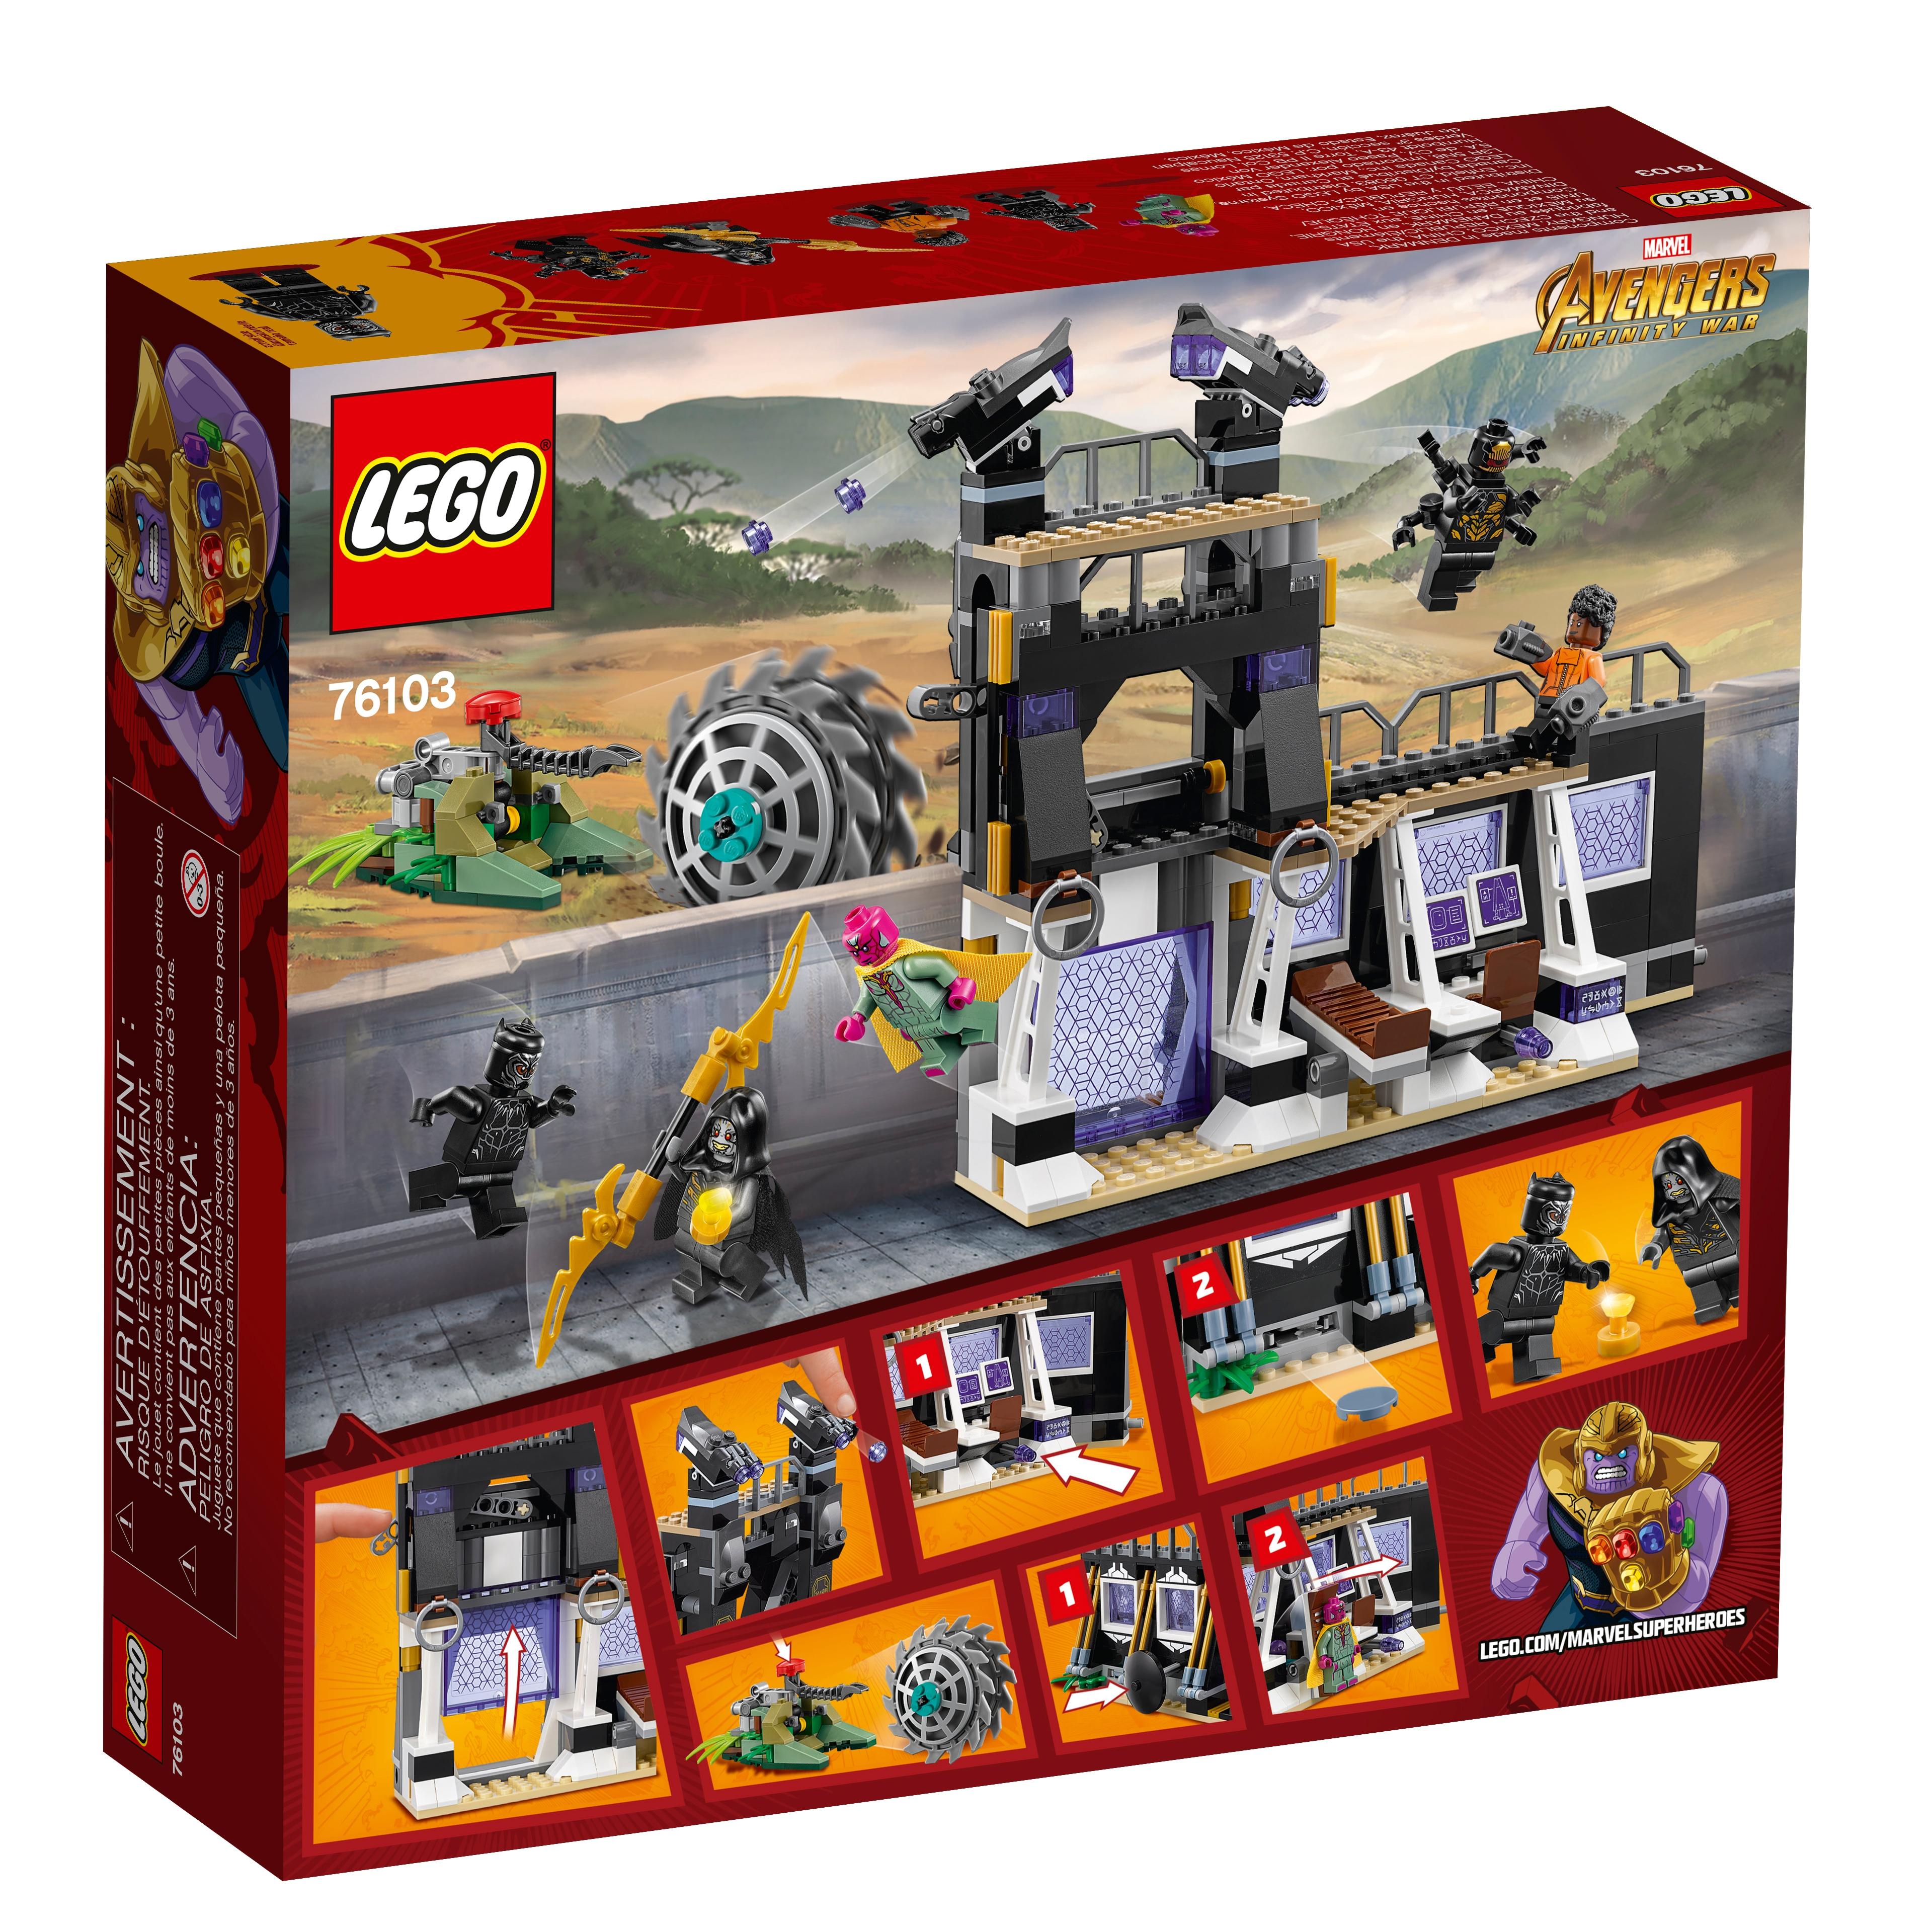 NEW LEGO BLACK PANTHER FROM SET 76103 AVENGERS INFINITY WAR (sh466)